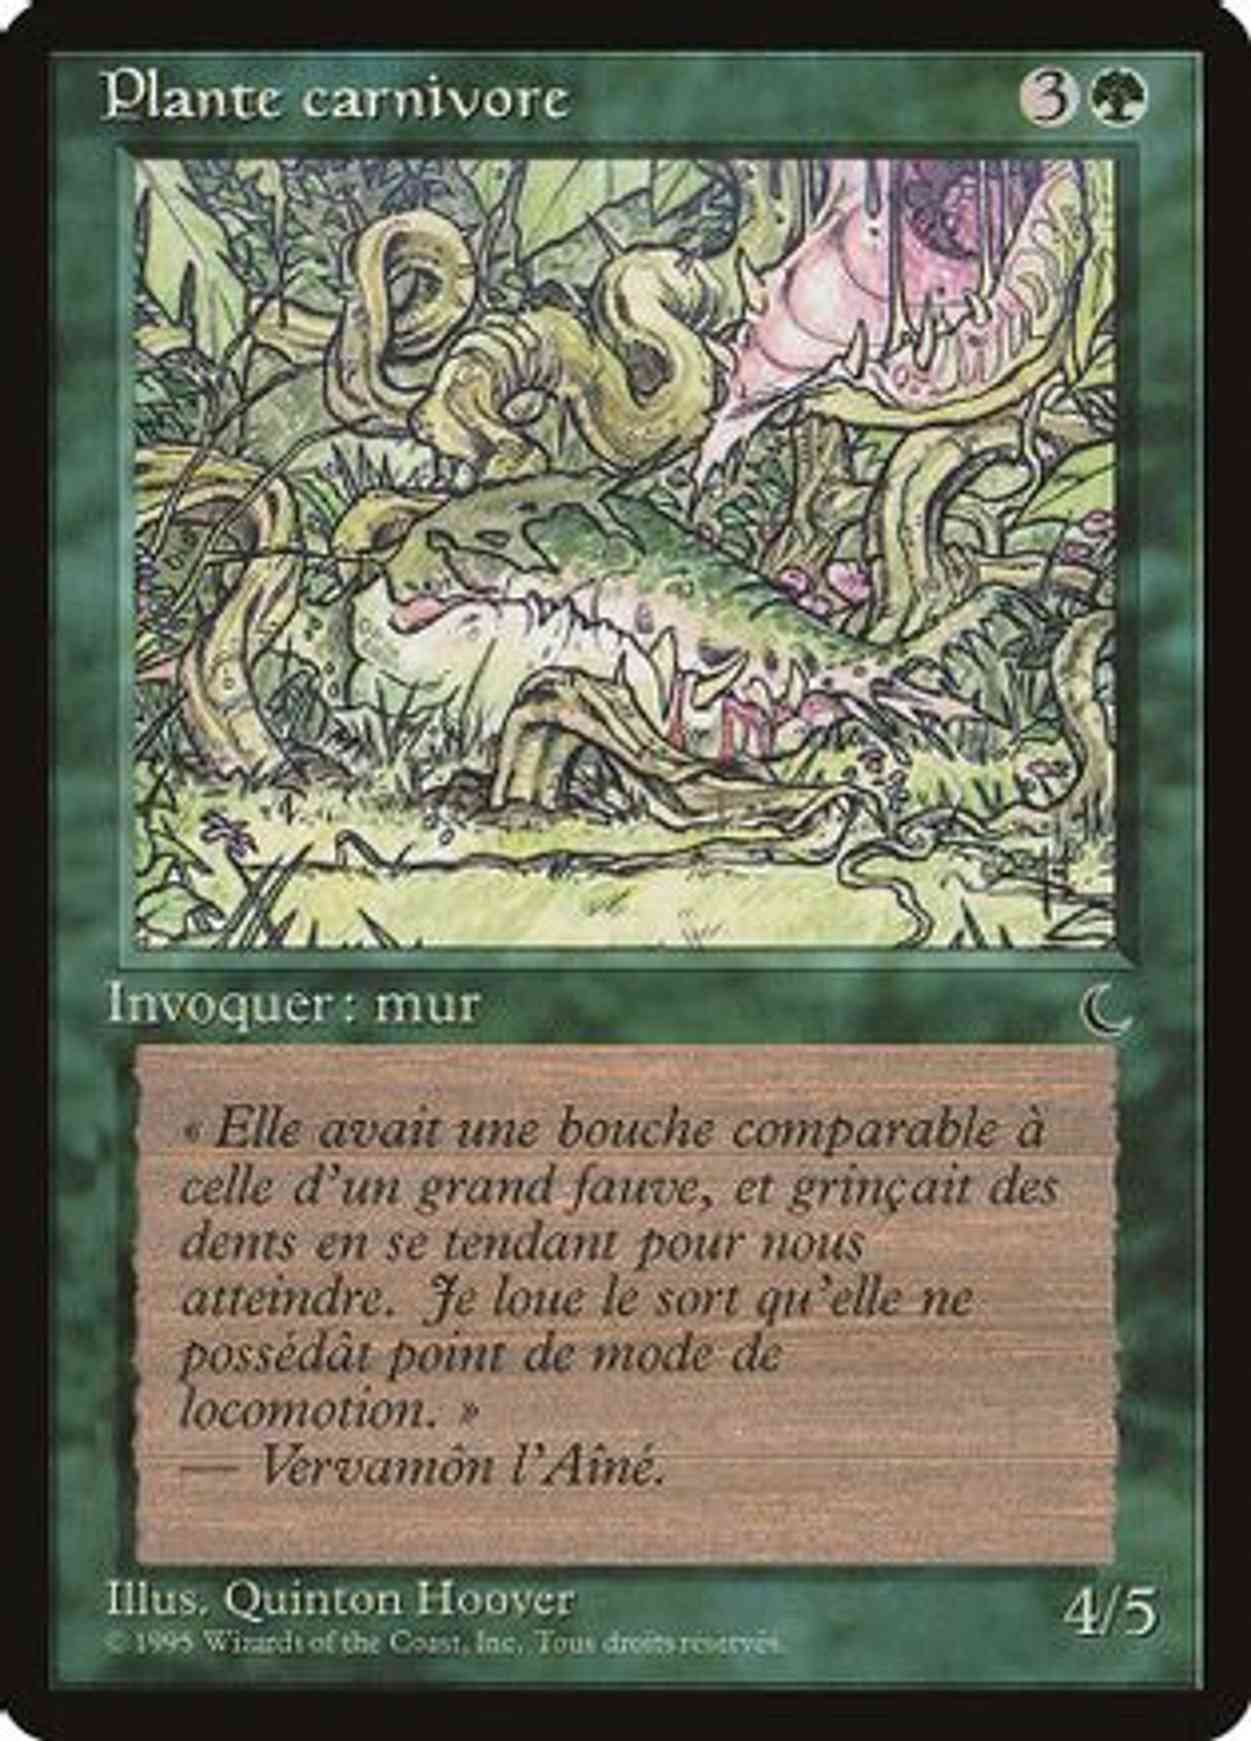 Carnivorous Plant (French) - "Plante carnivore" magic card front